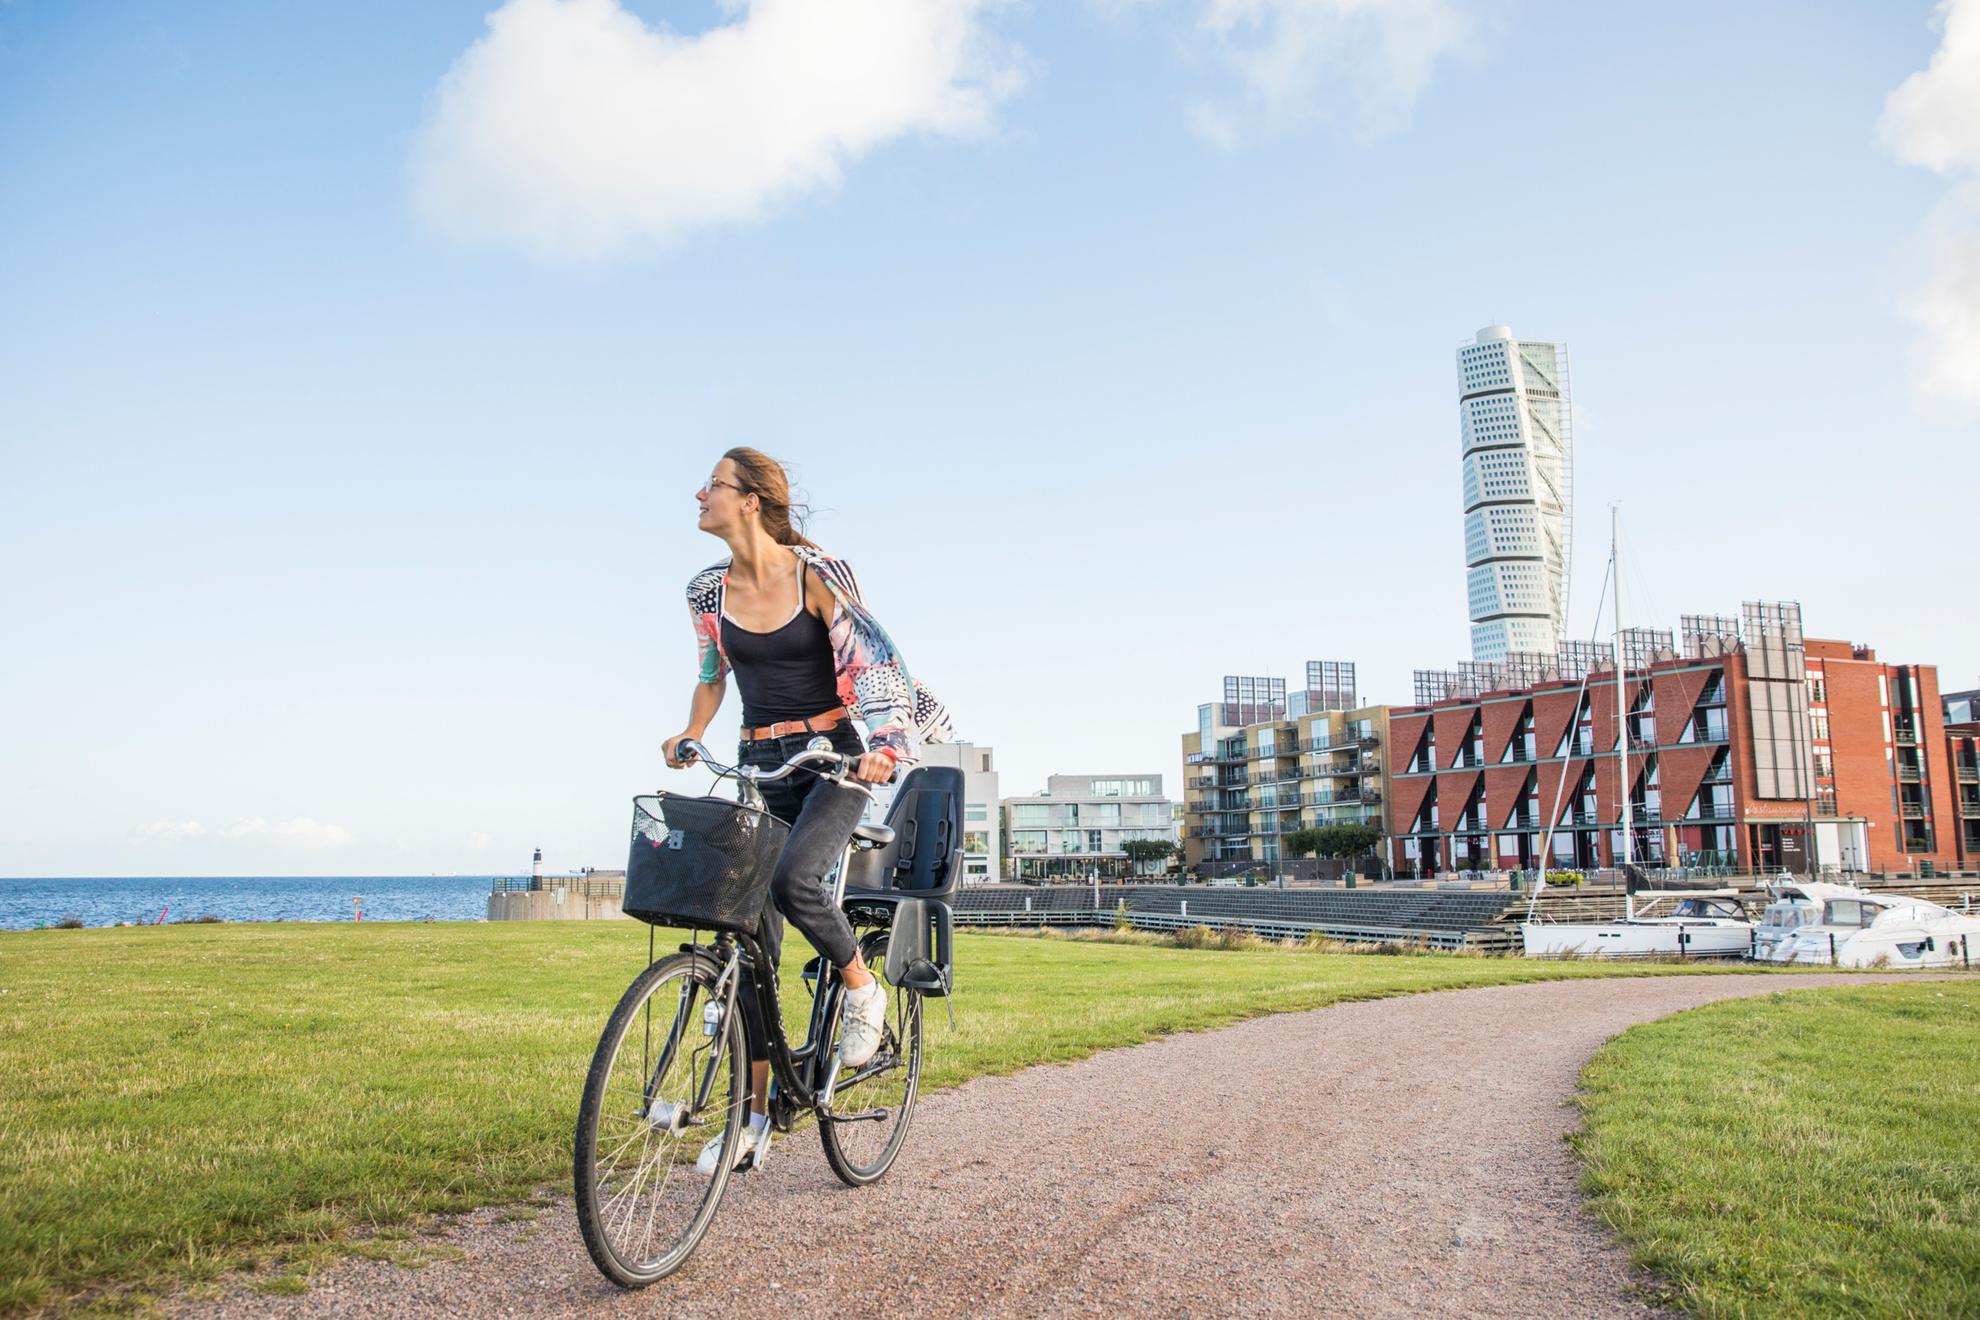 A woman ride a bike on a walkway, behind here you see a residential area by the sea and in the middle a skyscraper.